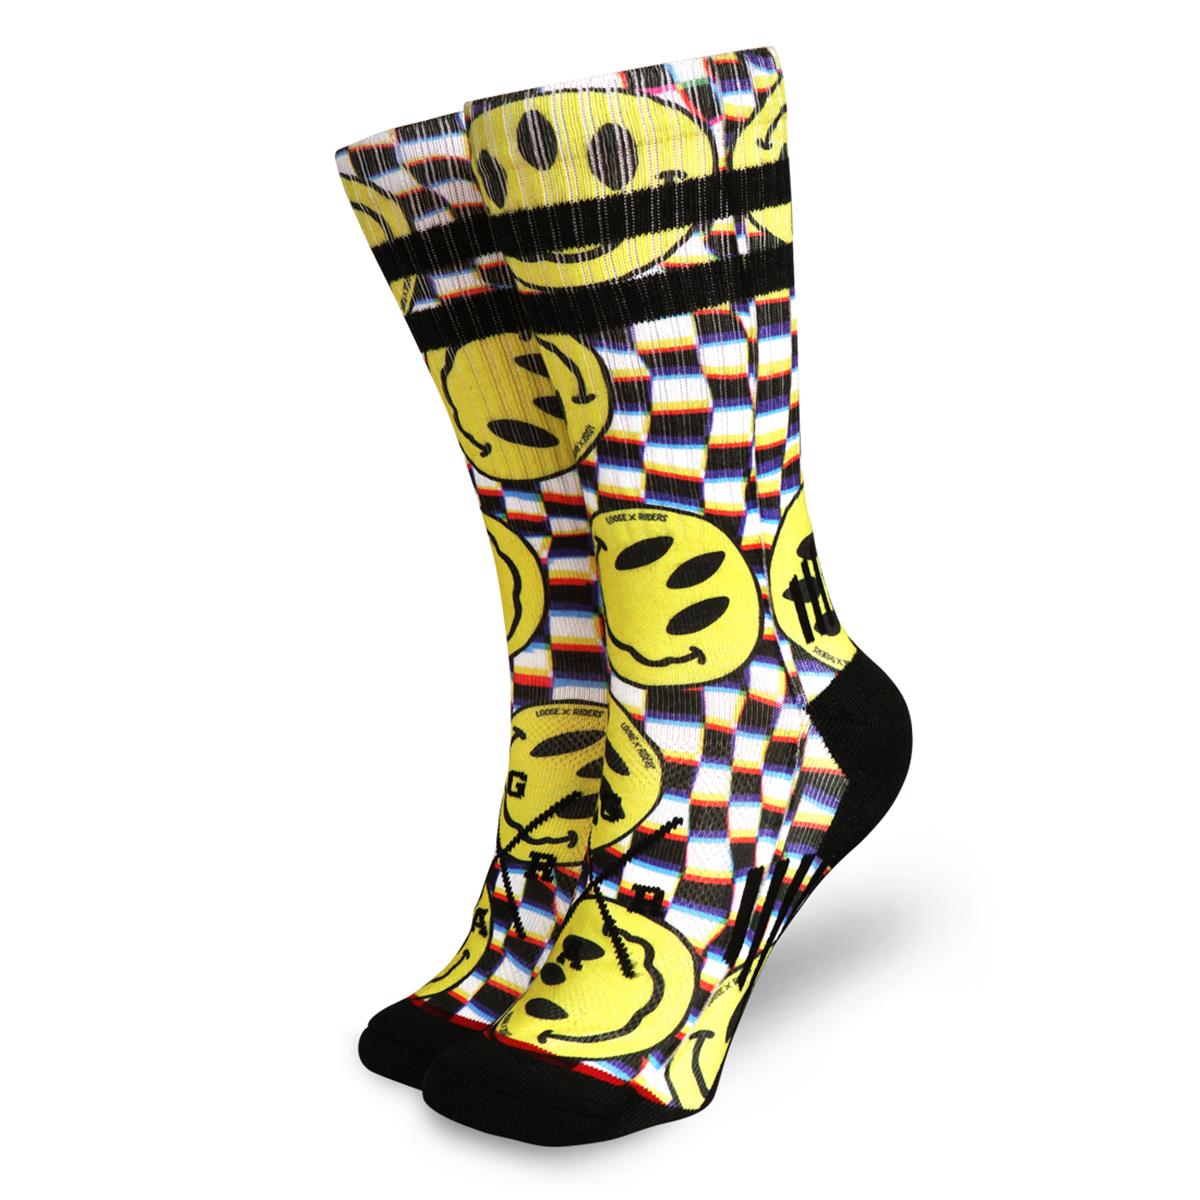 Loose Riders Chaussettes VTT  Stoked! - Black/Yellow